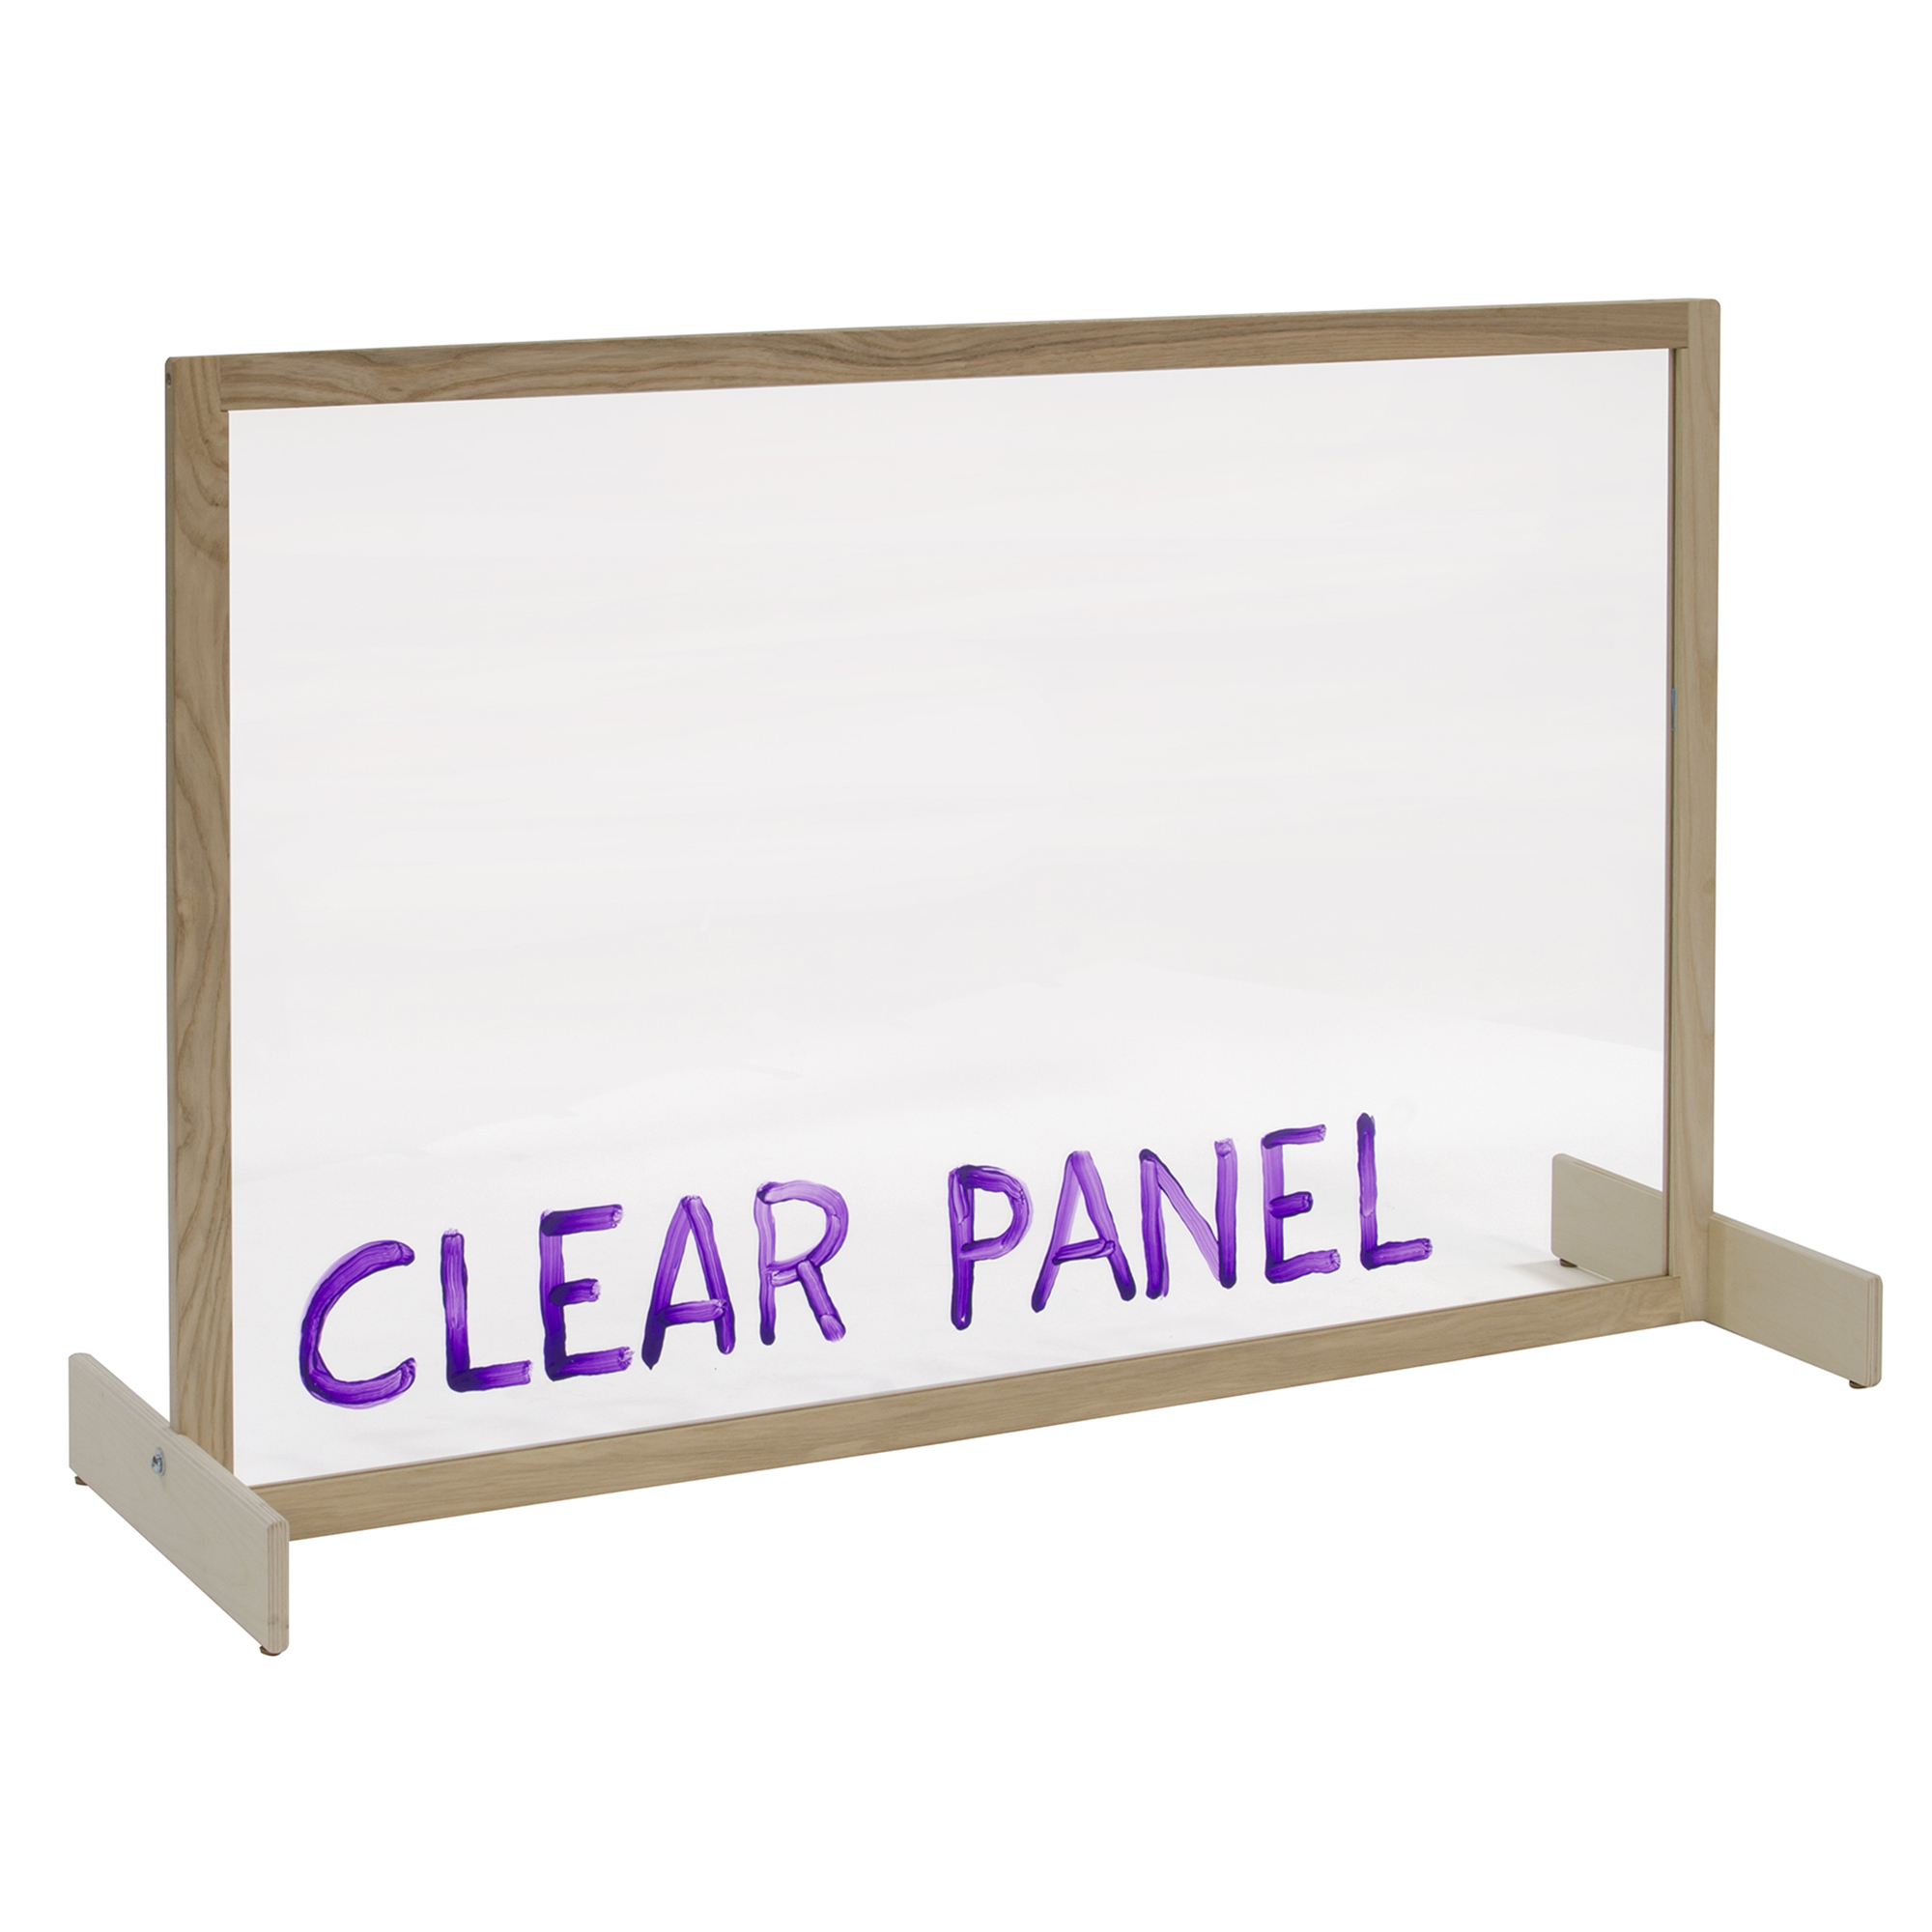 Clear Panel Room Divider